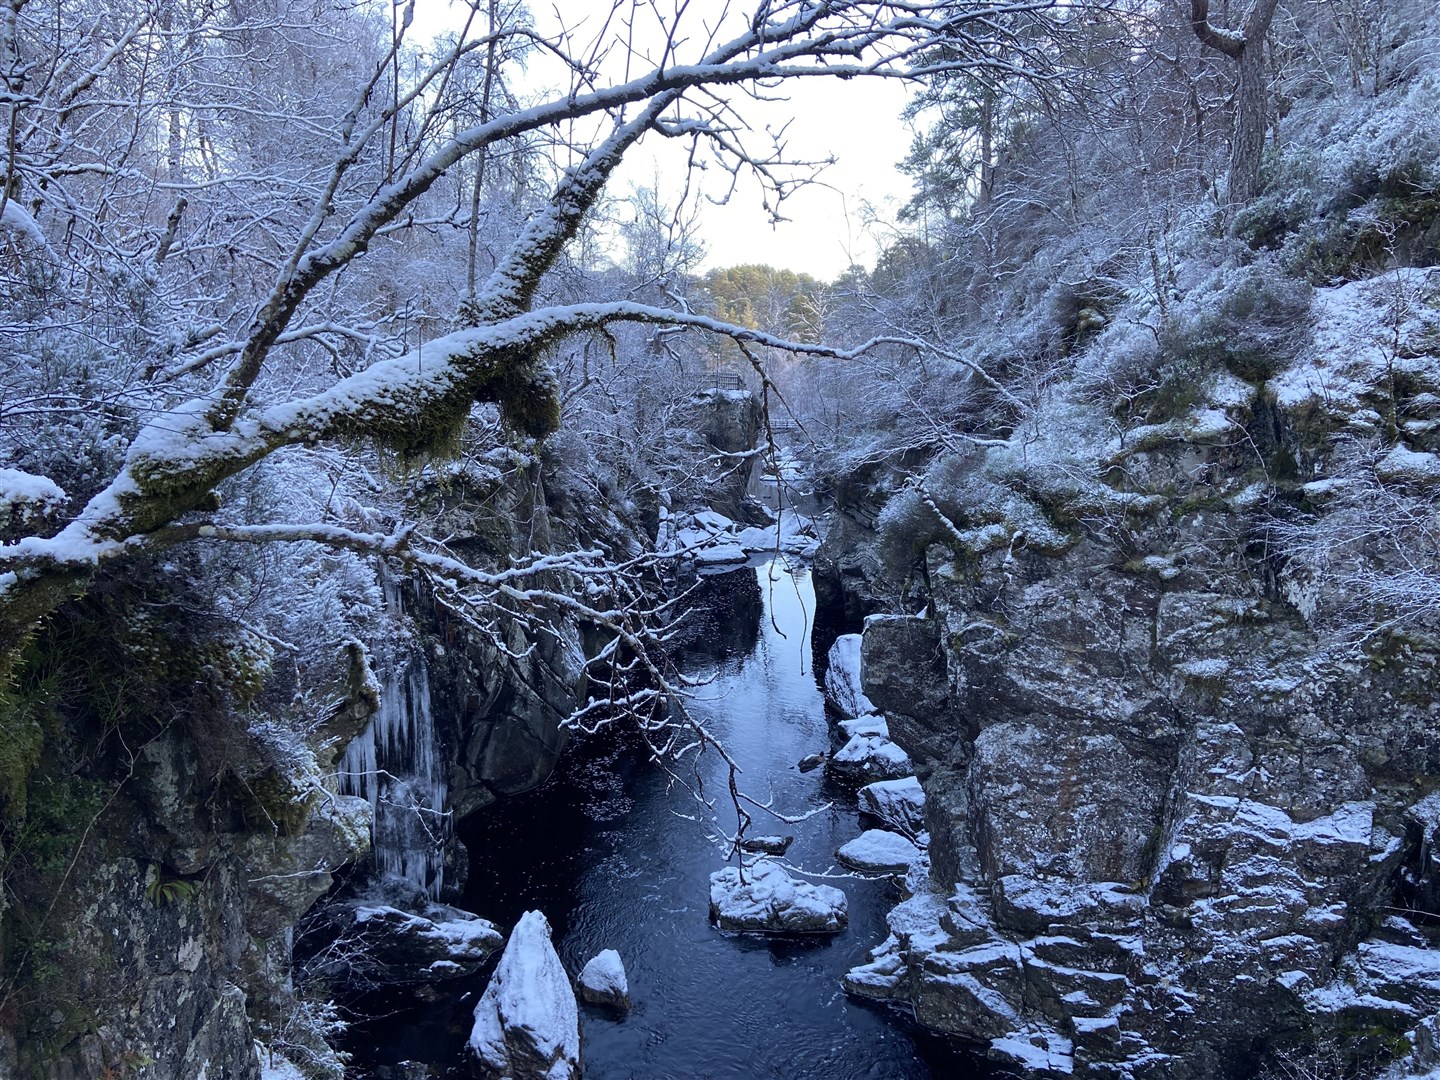 Michael Martin, from Inverness, took this photo at Dog Falls yesterday.